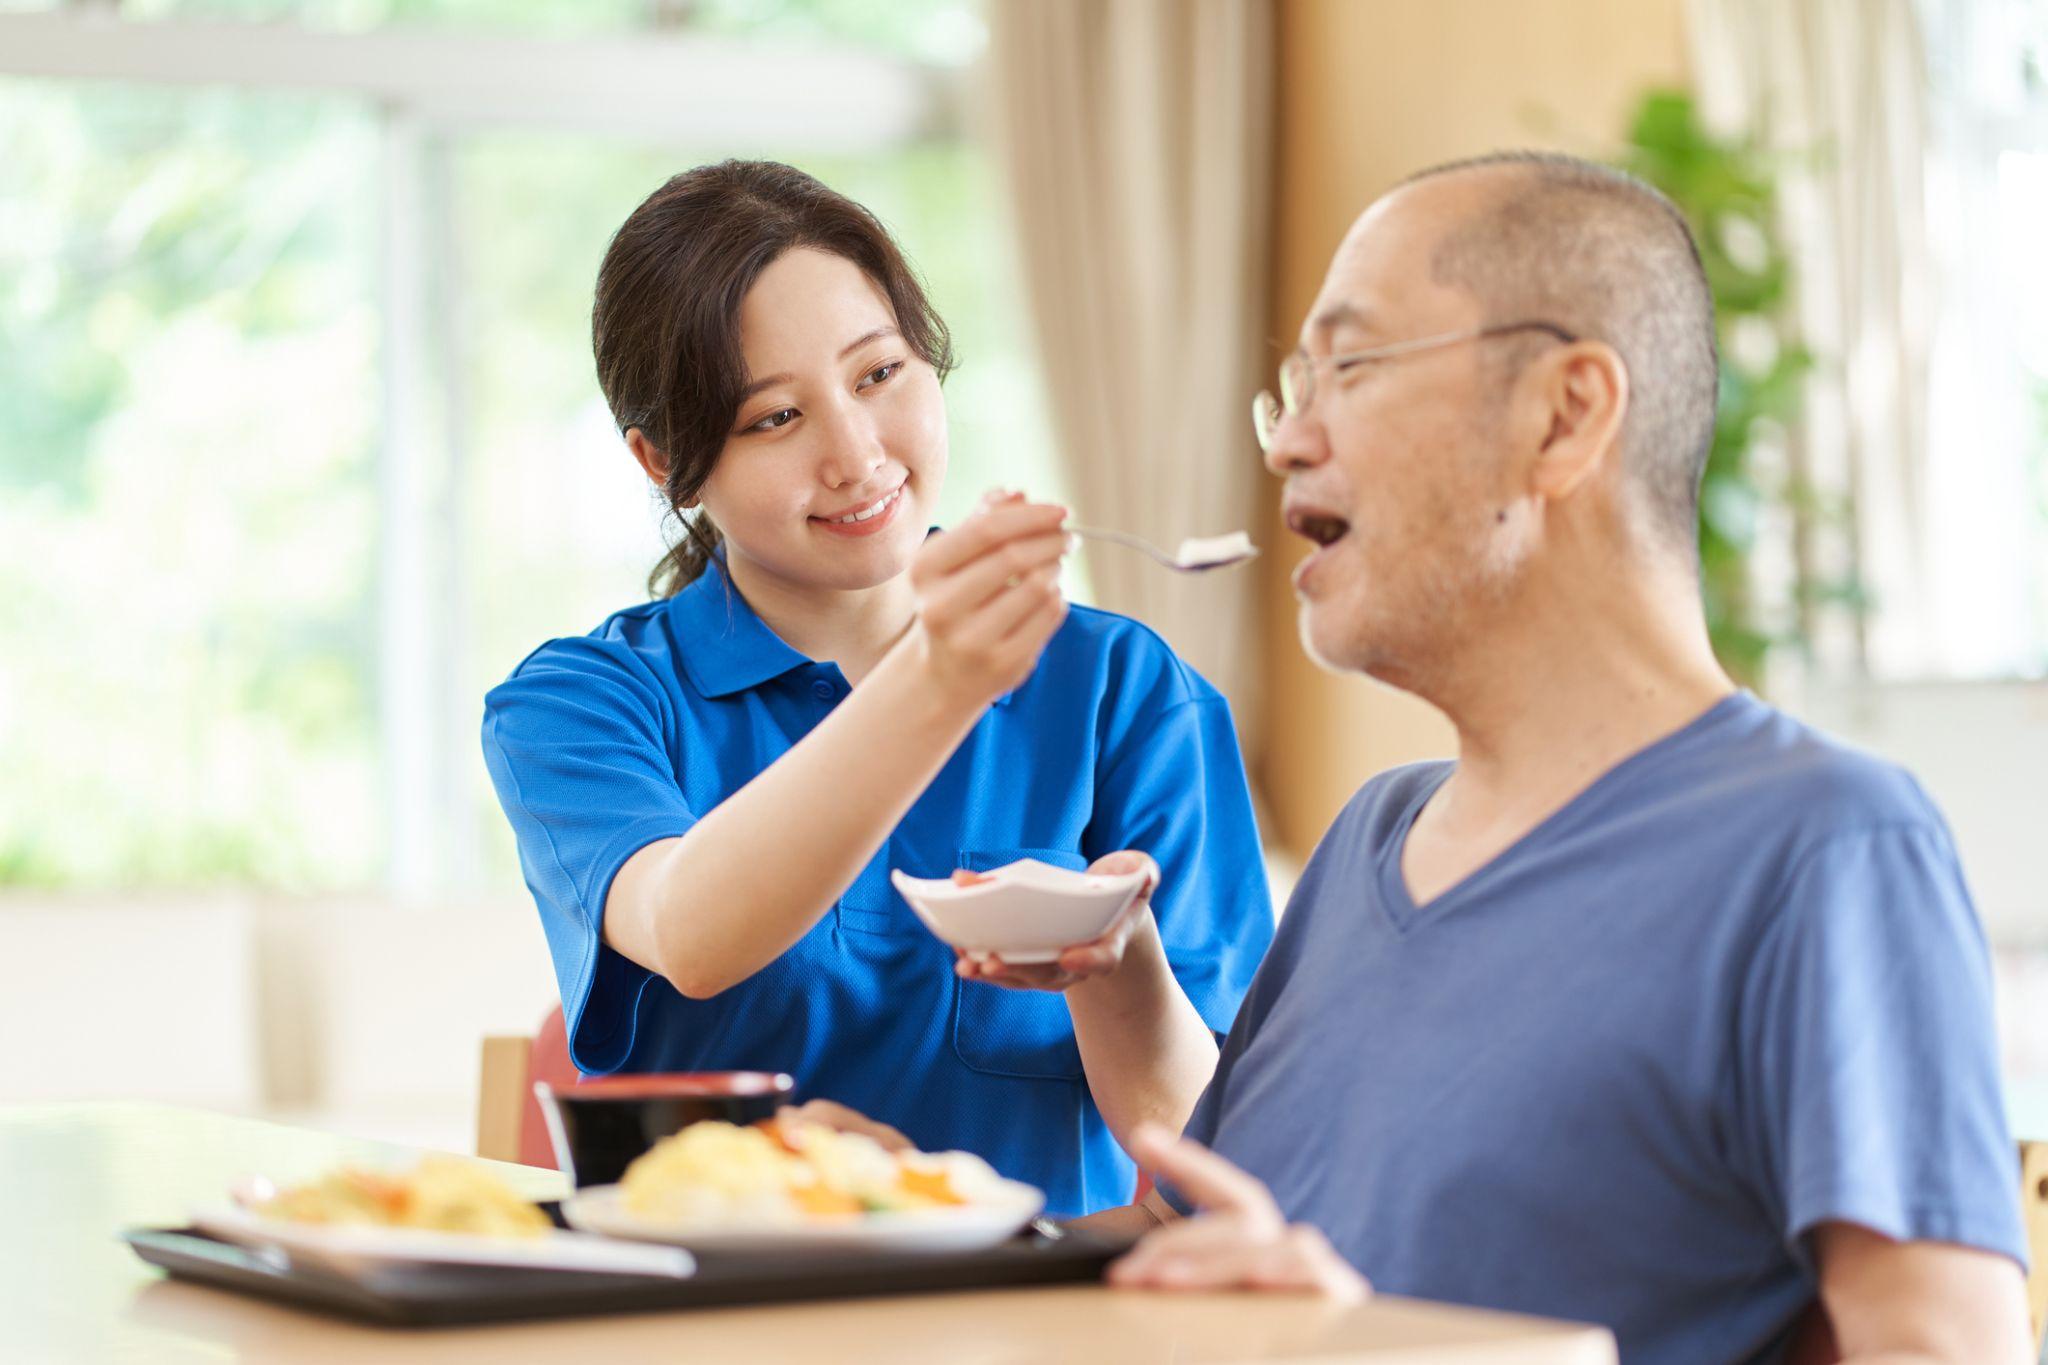 female aid in blue shirt feeds senior man in blue shirt wearing glasses in his home